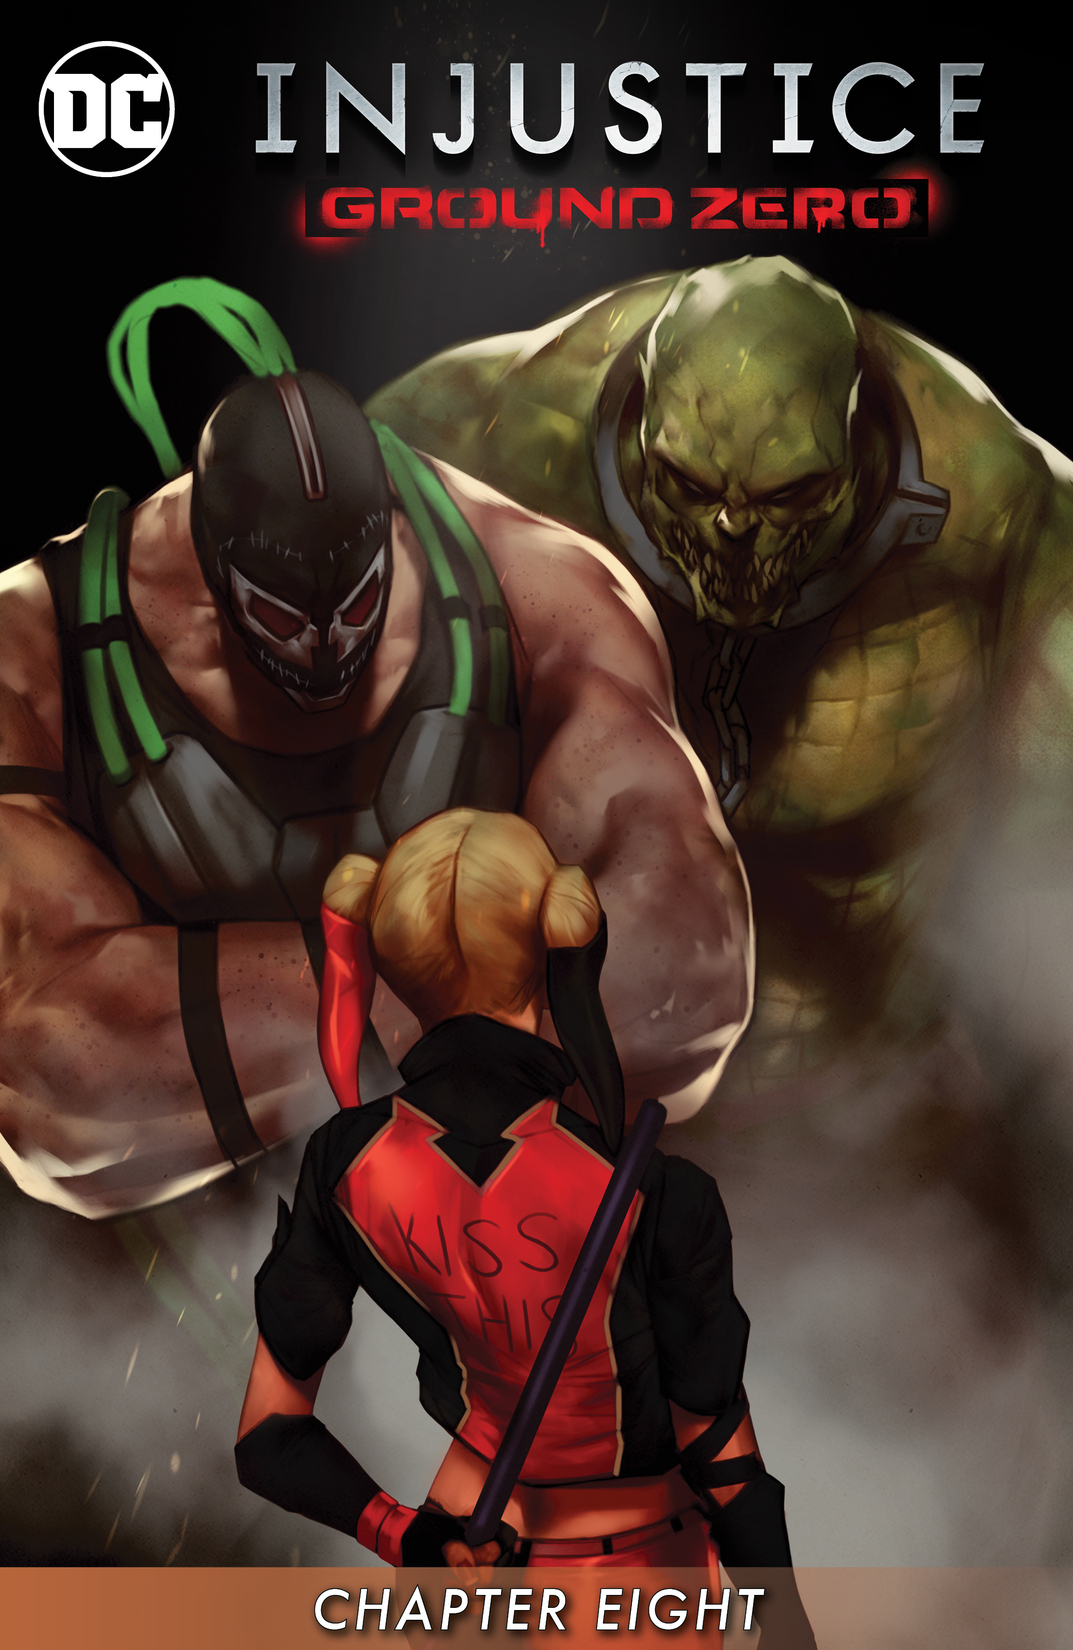 Injustice: Ground Zero #8 preview images